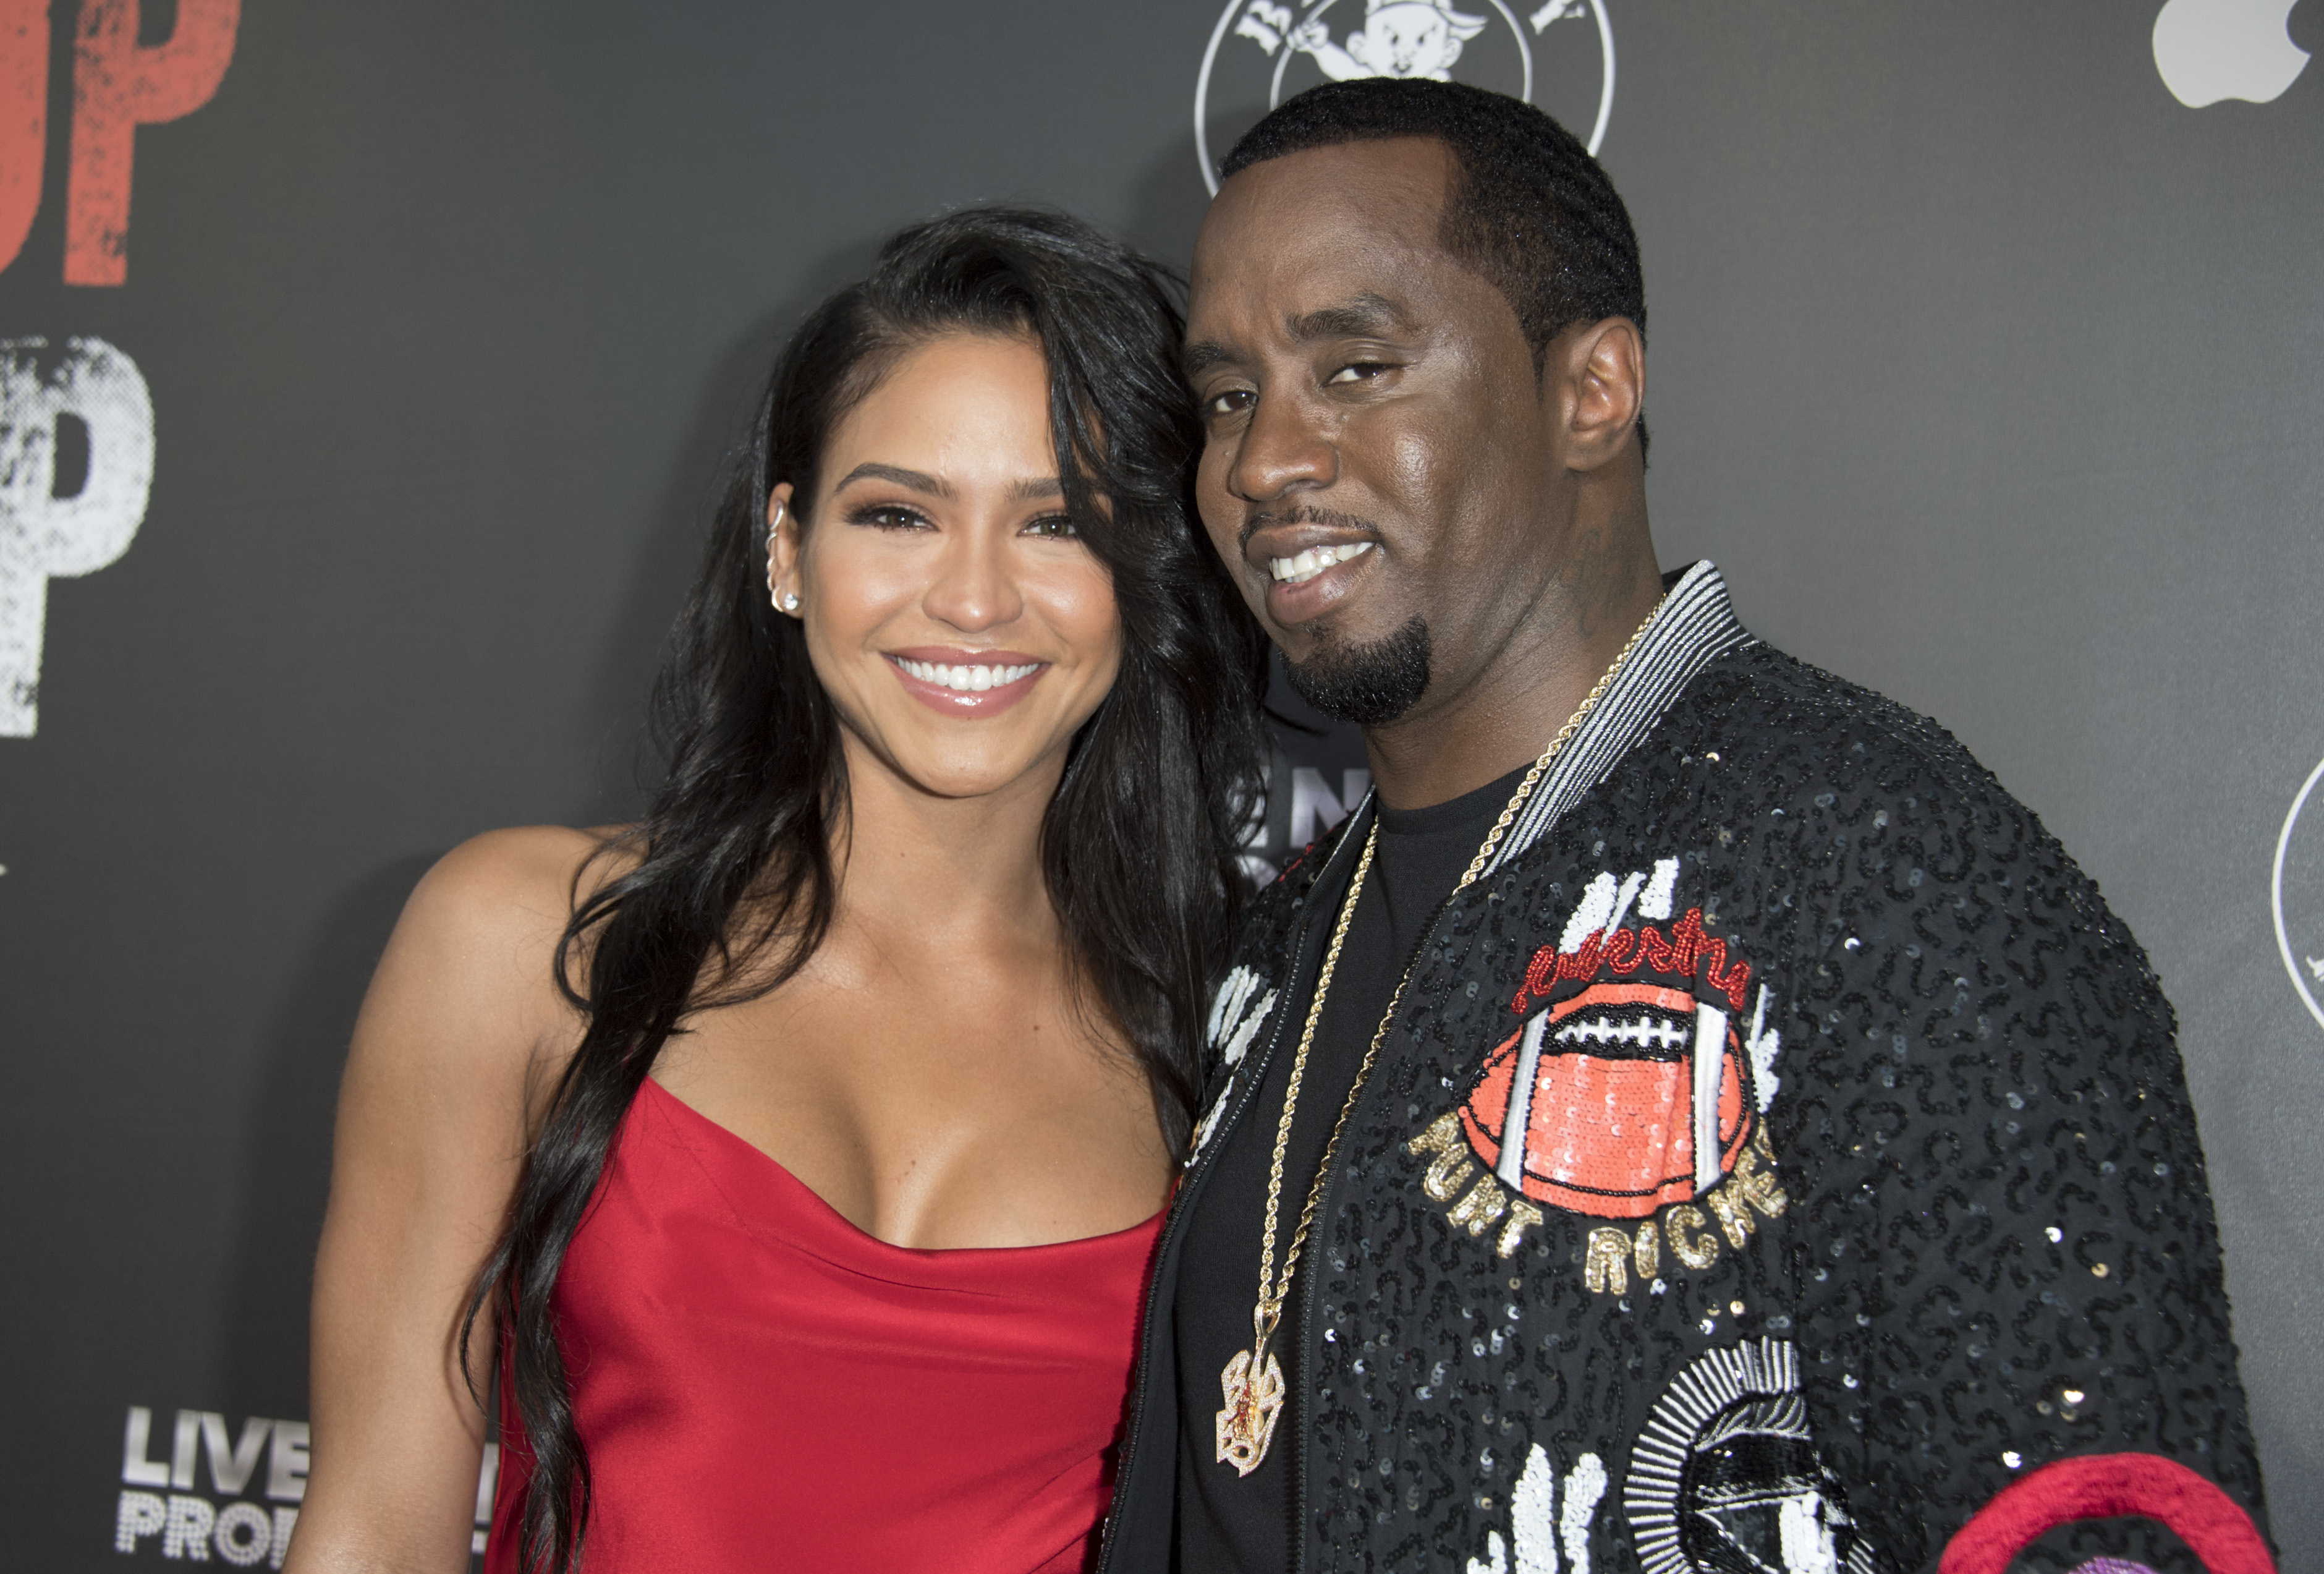 Los Angeles premiere of 'Can't Stop, Won't Stop: The Bad Boy Story'